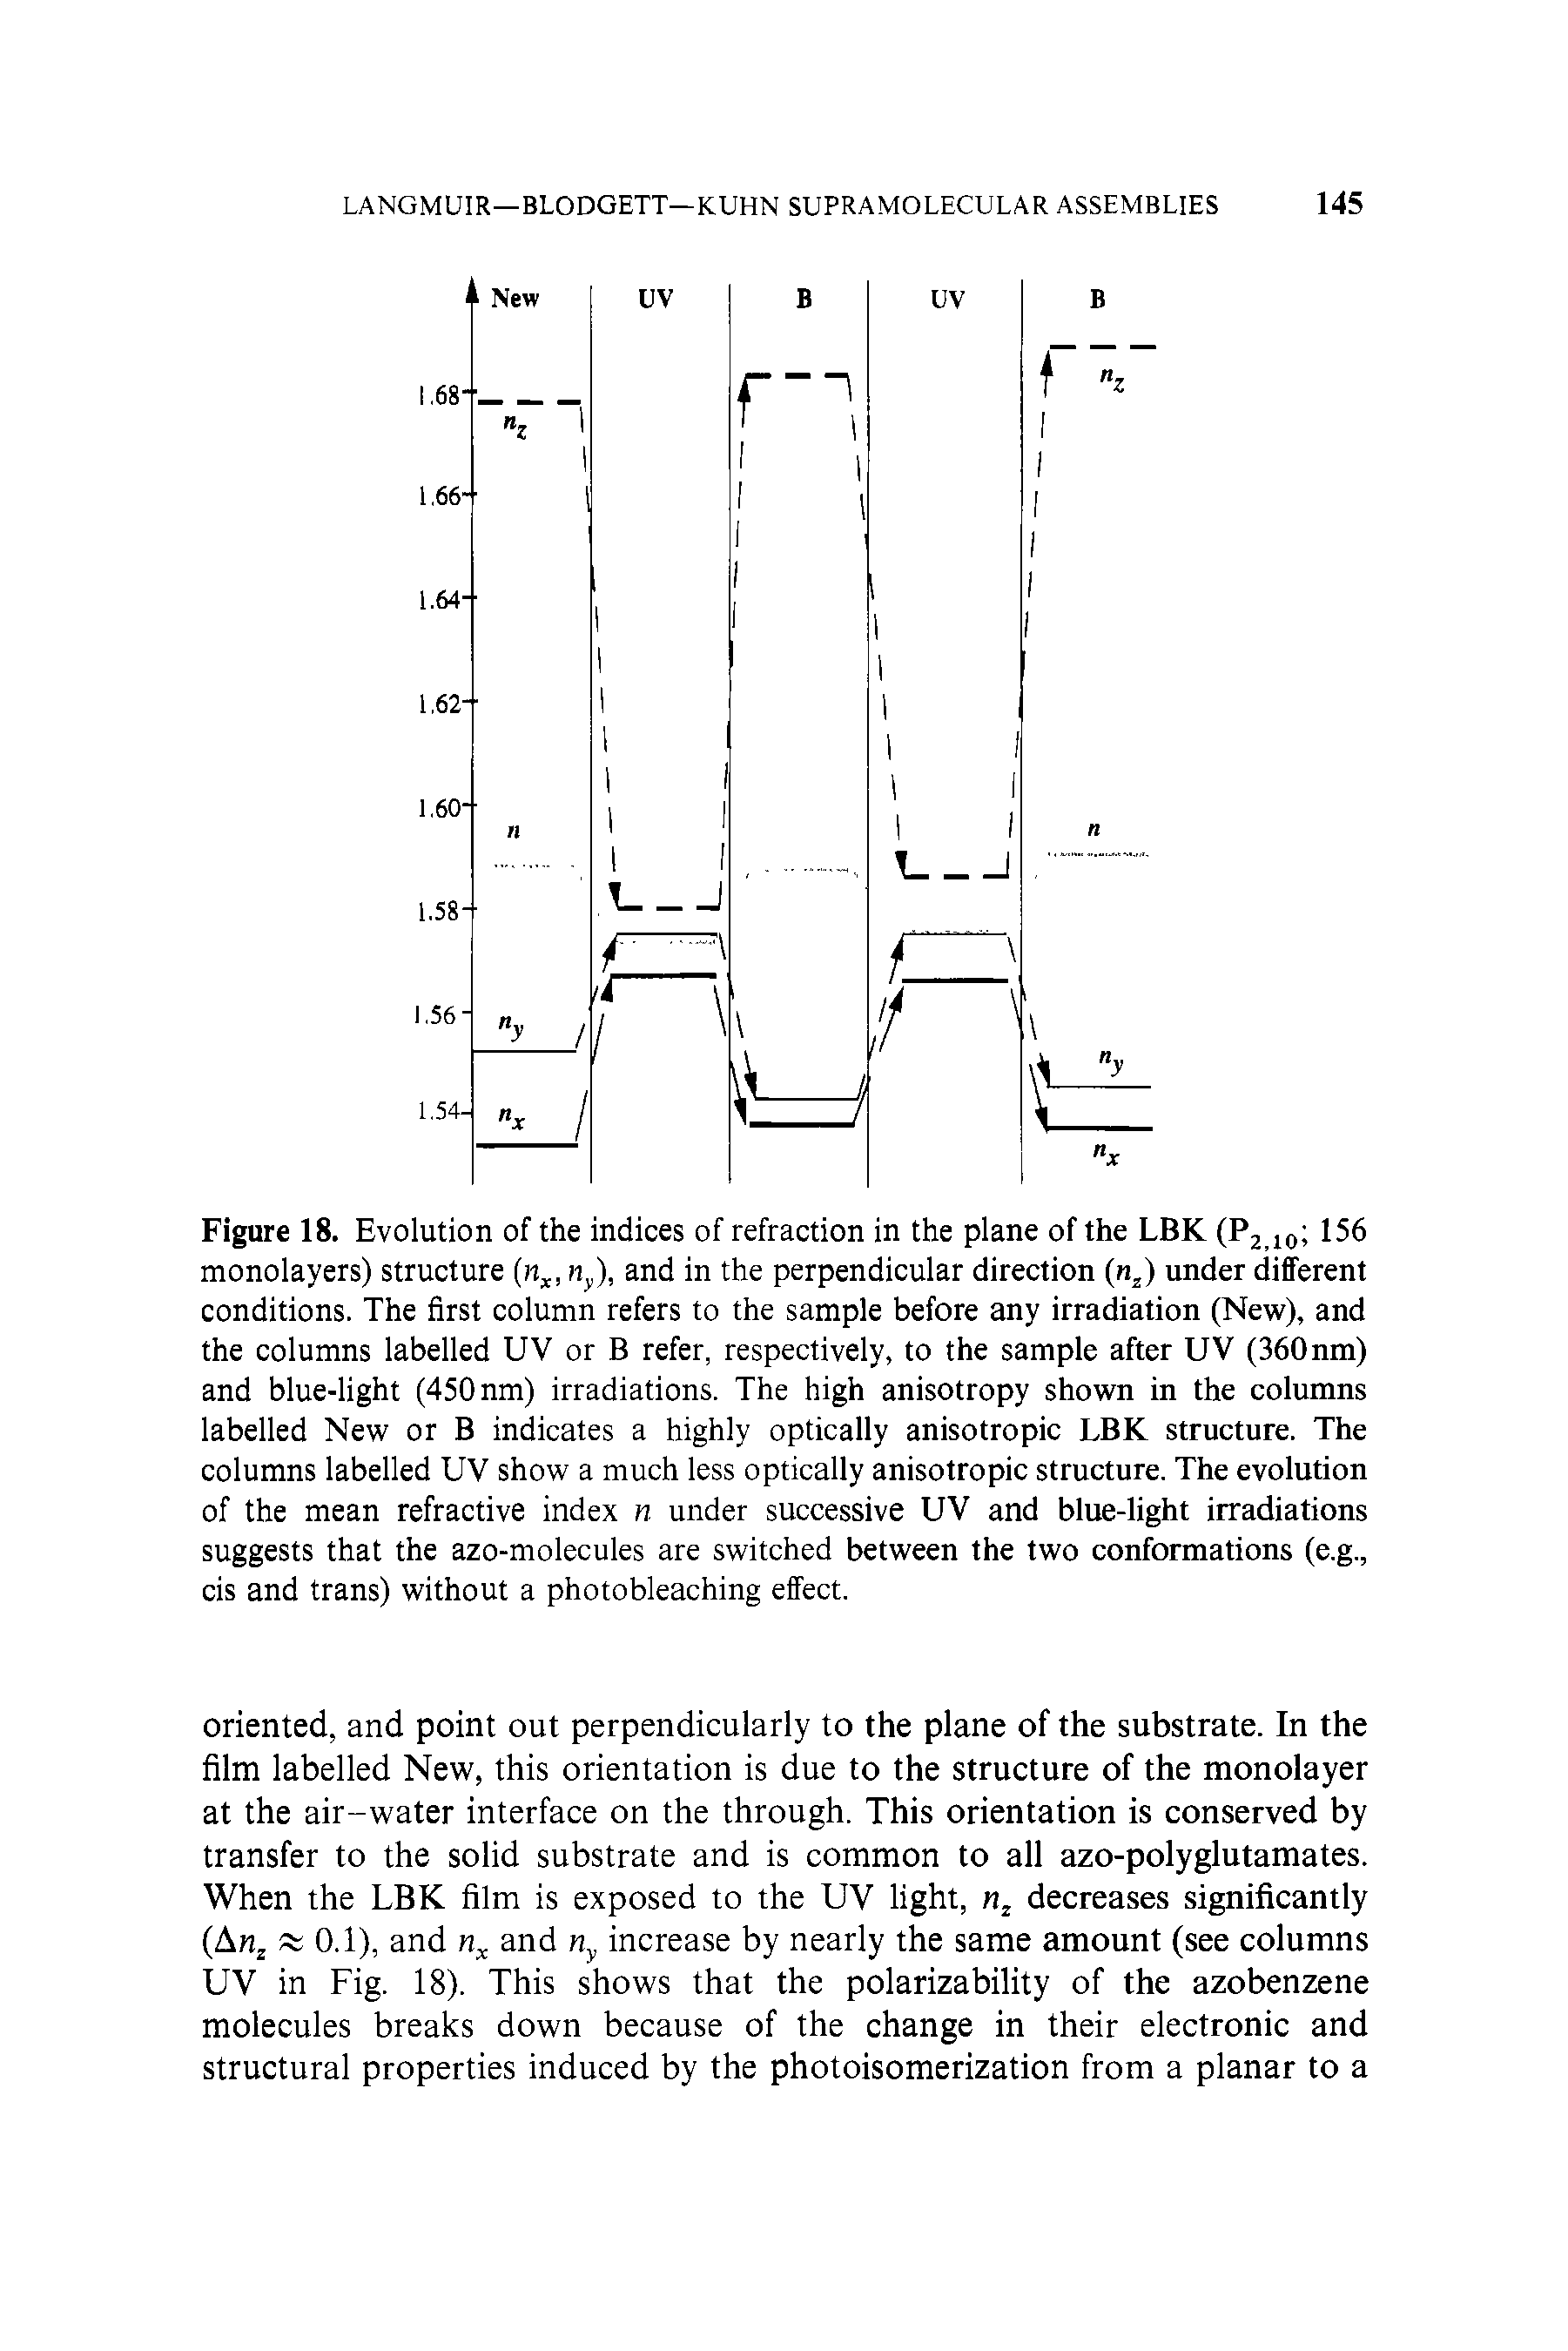 Figure 18. Evolution of the indices of refraction in the plane of the LBK (Pj.ioi 156 monolayers) structure n, n ), and in the perpendicular direction (n ) under different conditions. The first column refers to the sample before any irradiation (New), and the columns labelled UV or B refer, respectively, to the sample after UV (360 nm) and blue-light (450 nm) irradiations. The high anisotropy shown in the columns labelled New or B indicates a highly optically anisotropic LBK structure. The columns labelled UV show a much less optically anisotropic structure. The evolution of the mean refractive index n under successive UV and blue-light irradiations suggests that the azo-molecules are switched between the two conformations (e.g., cis and trans) without a photobleaching effect.